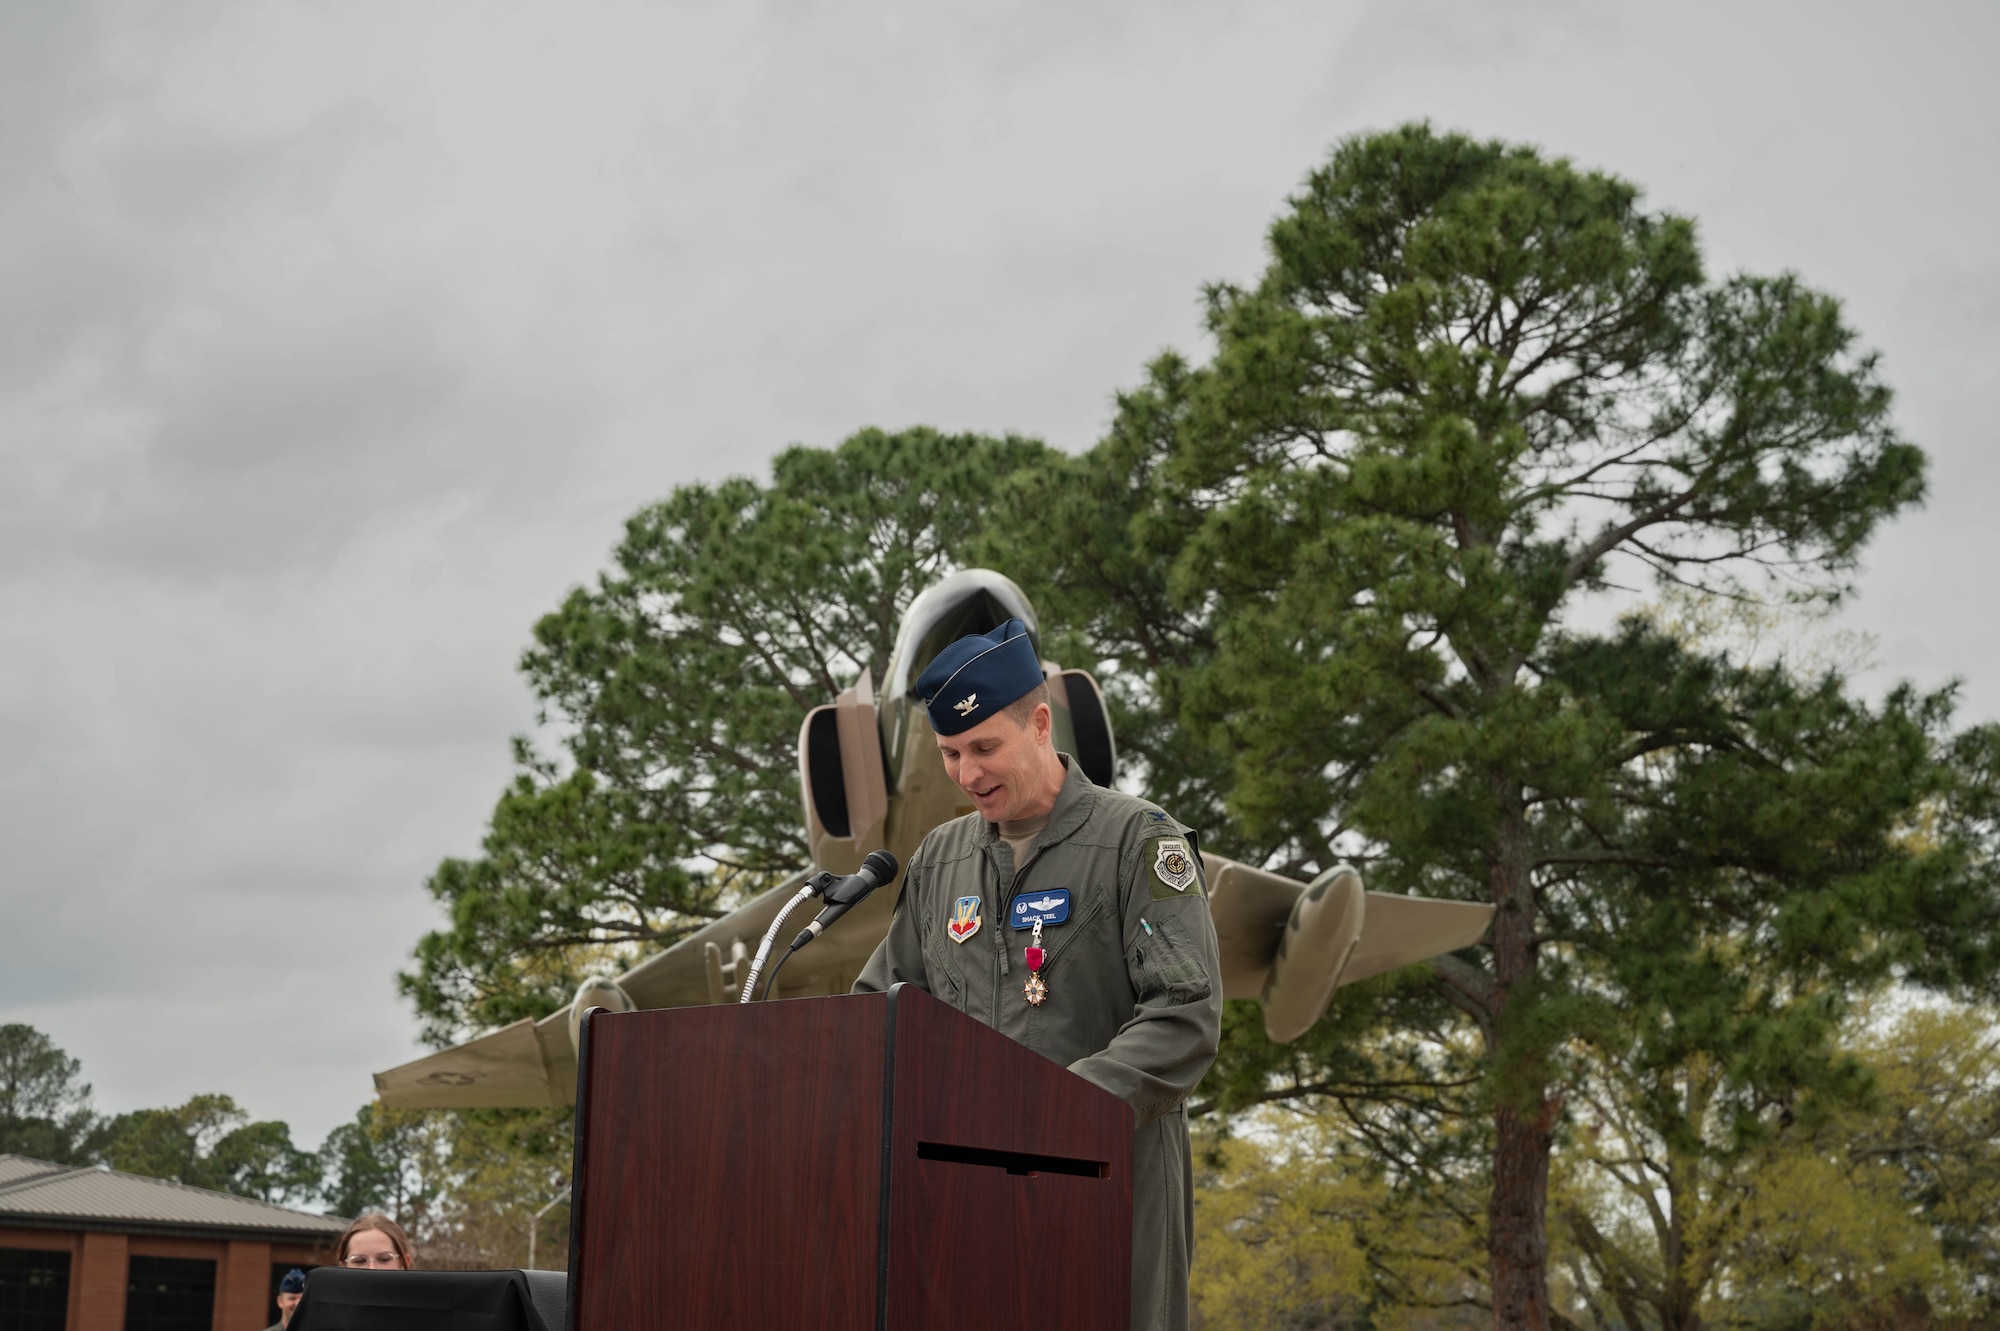 Col. Lucas Teel, 4th Fighter Wing out-going commander, gives remarks at the 4 FW change of command ceremony at Seymour Johnson Air Force Base, North Carolina, March 22, 2024. Change of command ceremonies are a long-standing military tradition that symbolizes the official transfer of power and duties from the departing commander to the incoming commander. (U.S Air Force photo by Airman 1st Class Rebecca Sirimarco-Lang)